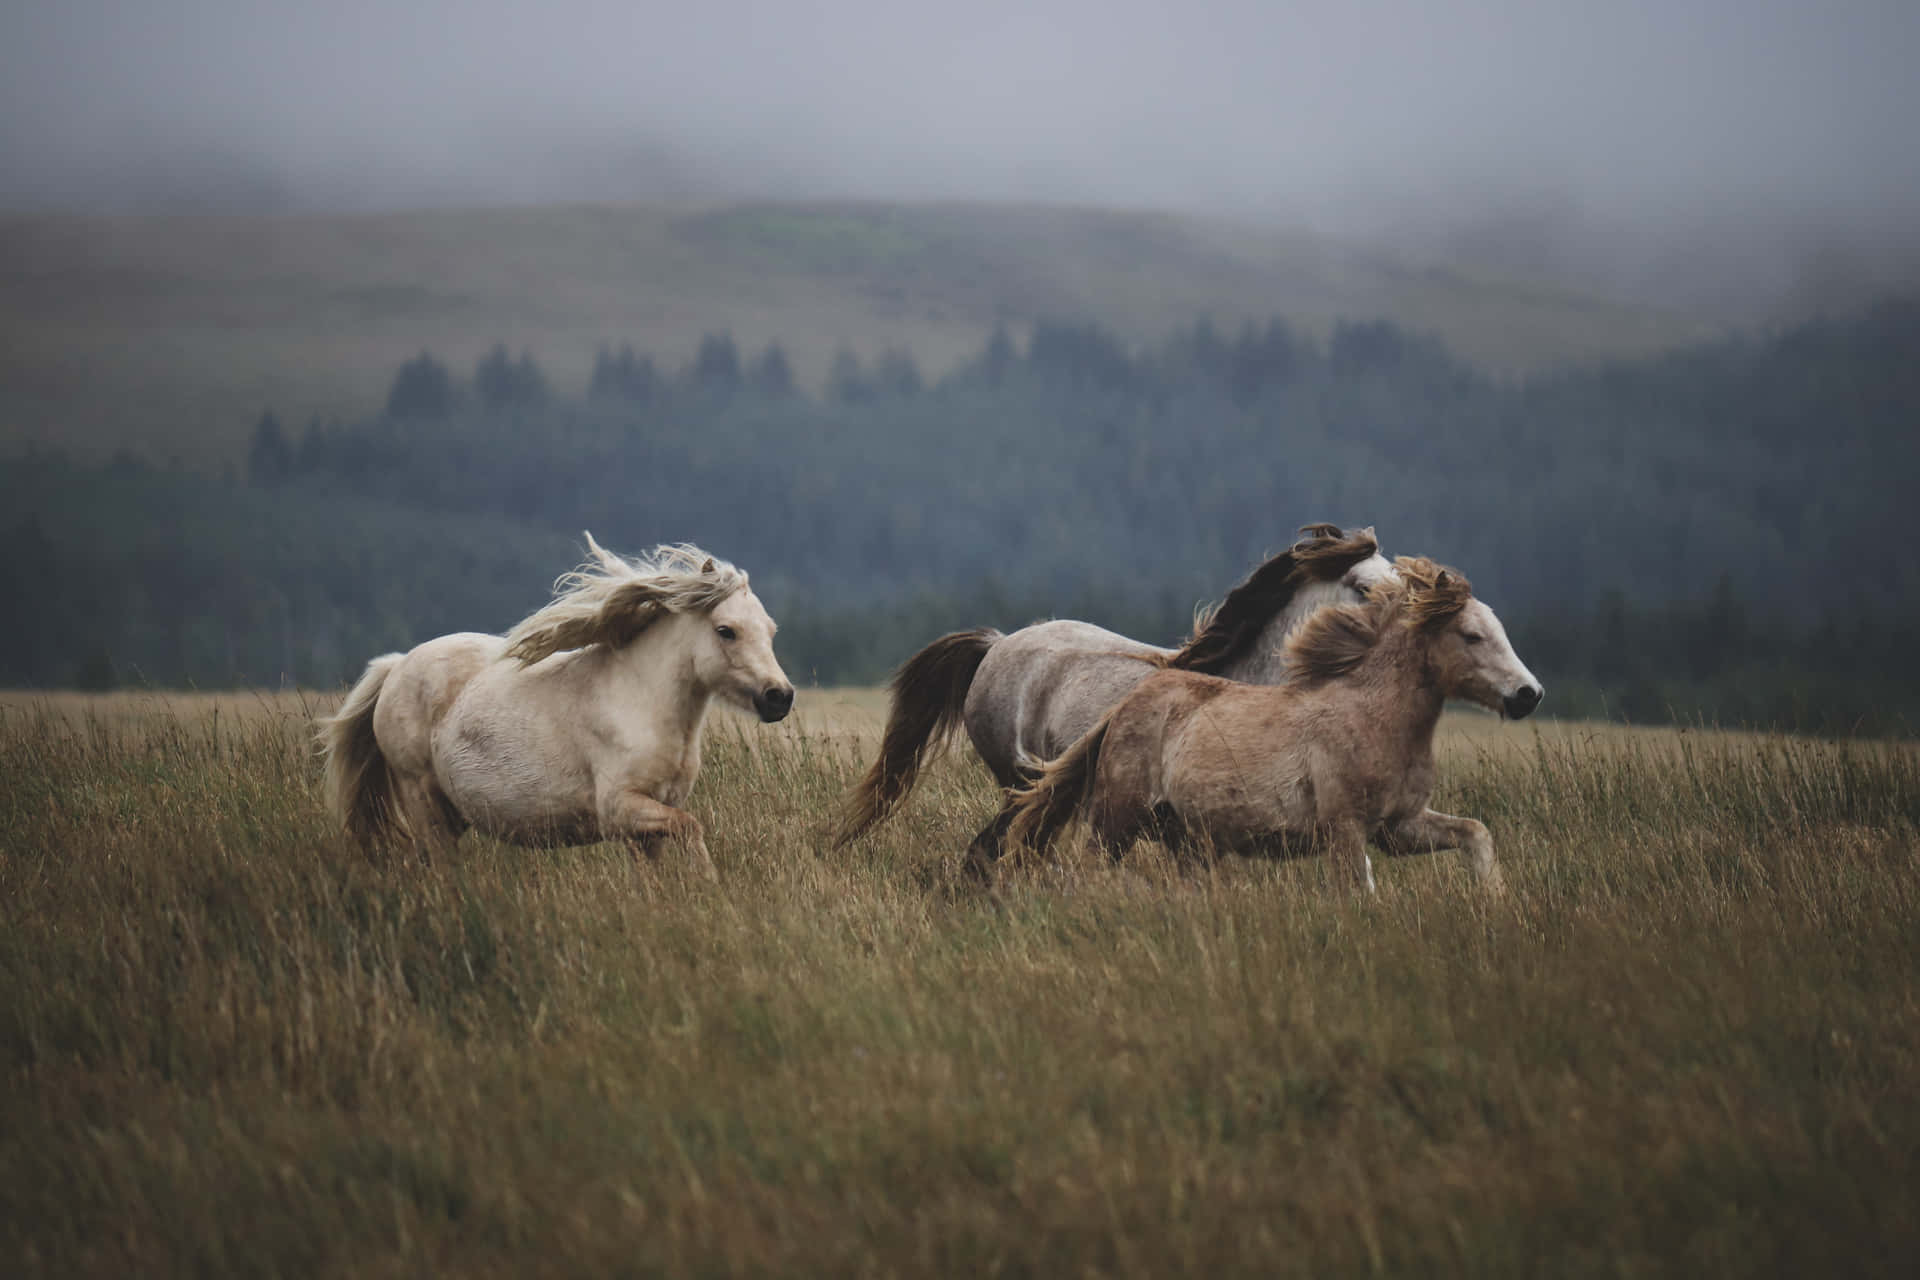 Two beautiful horses standing side-by-side in a meadow